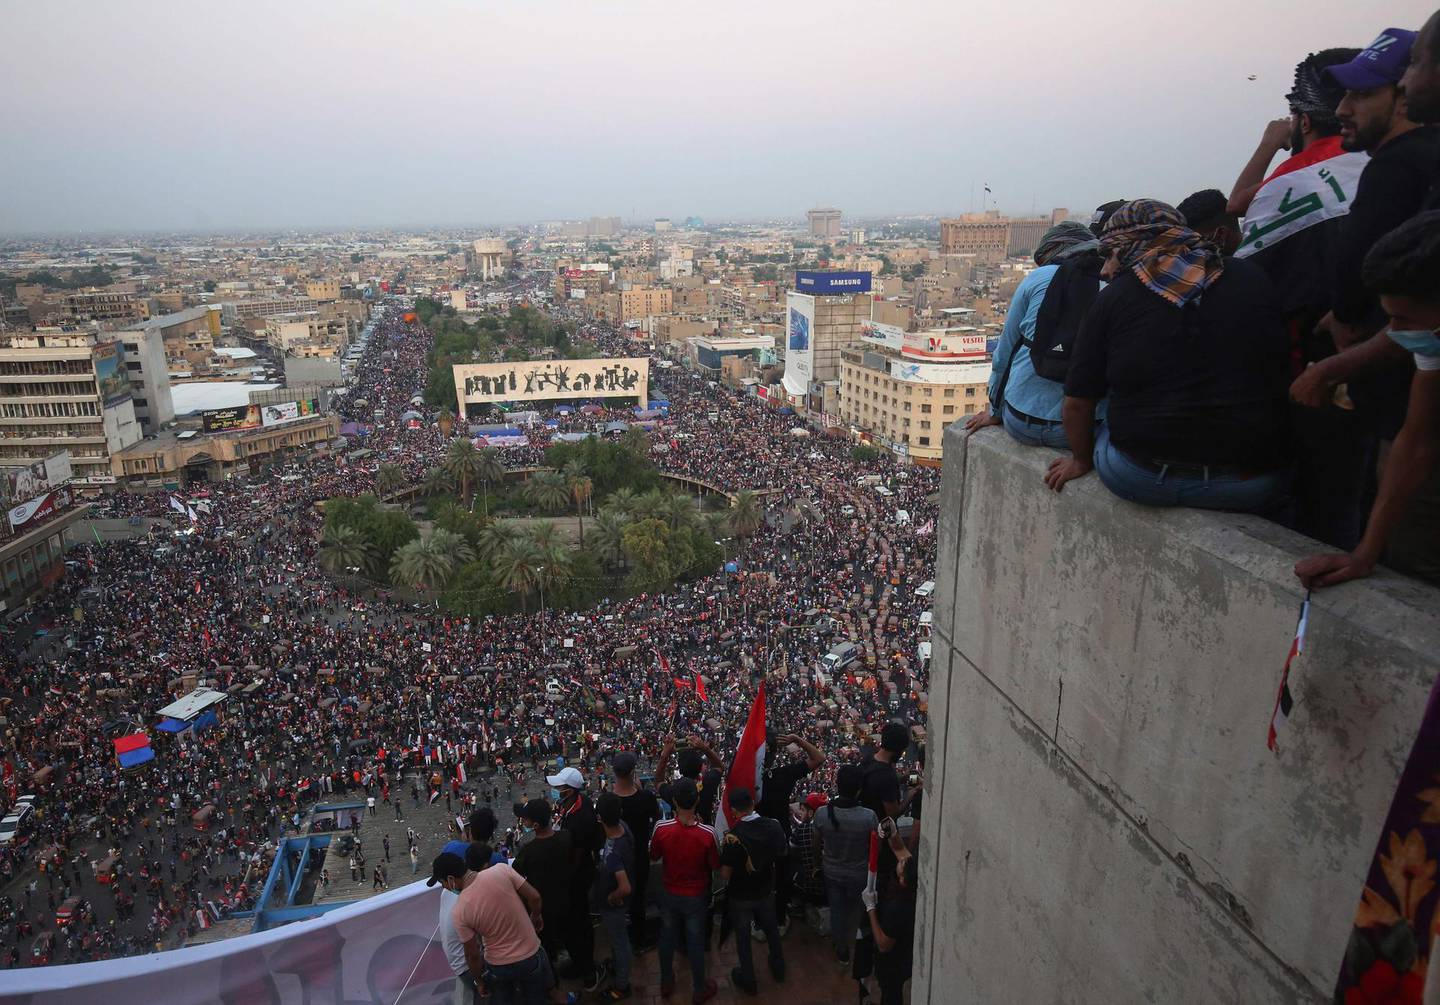 Iraqi demonstrators gather on several storeys of the  "Turkish restaurant"  an abandoned building in the capital Baghdad, overlooking the Tahrir square and the al-Jumhuriya bridge that leads to the high-security Green Zone, which hosts government offices and foreign embassies, during the ongoing anti-government protests on October 31, 2019. The "Turkish restaurant", a relic from the time of Saddam Hussein, has become the control tower of the revolt against power in Iraq. / AFP / AHMAD AL-RUBAYE
